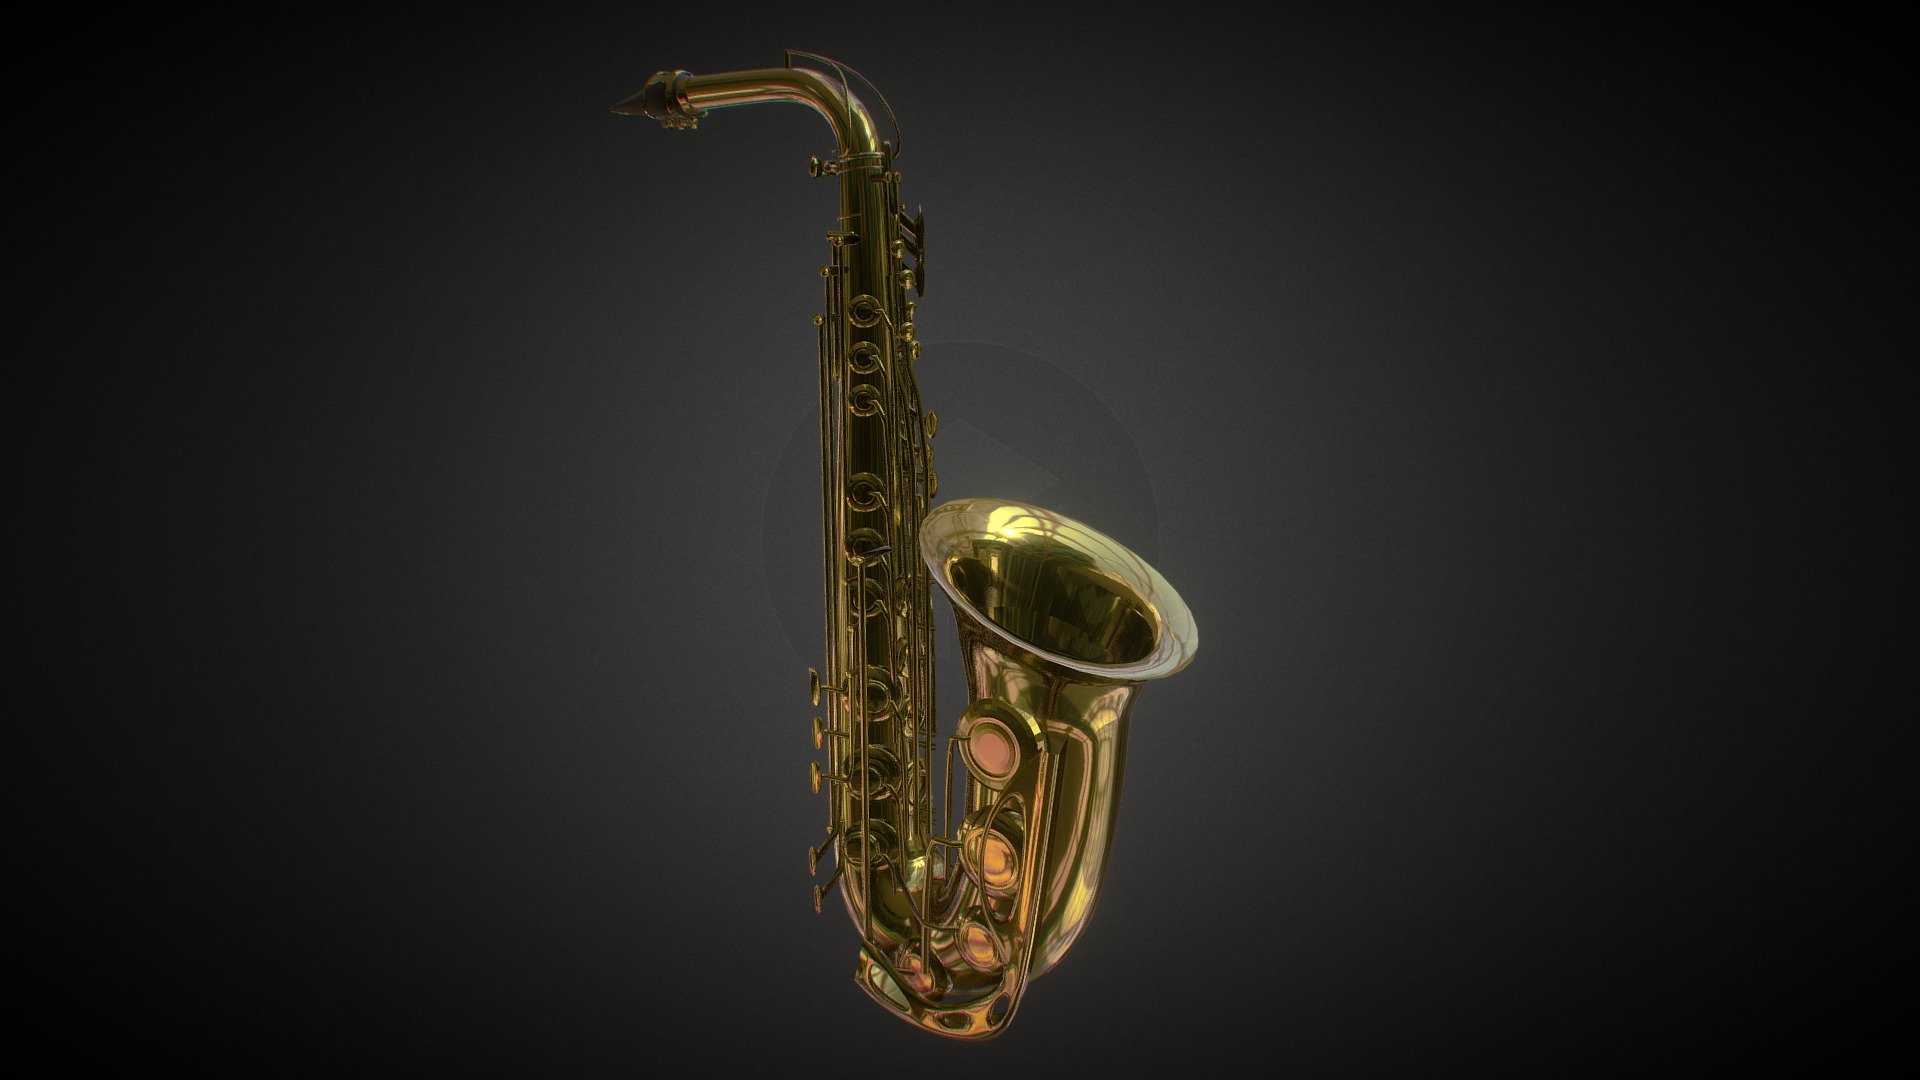 I share my saxophone model for free 😄
Made with blender - saxophone alto - Download Free 3D model by AT design studio (@ANDRIANIAINAToky) 3d model